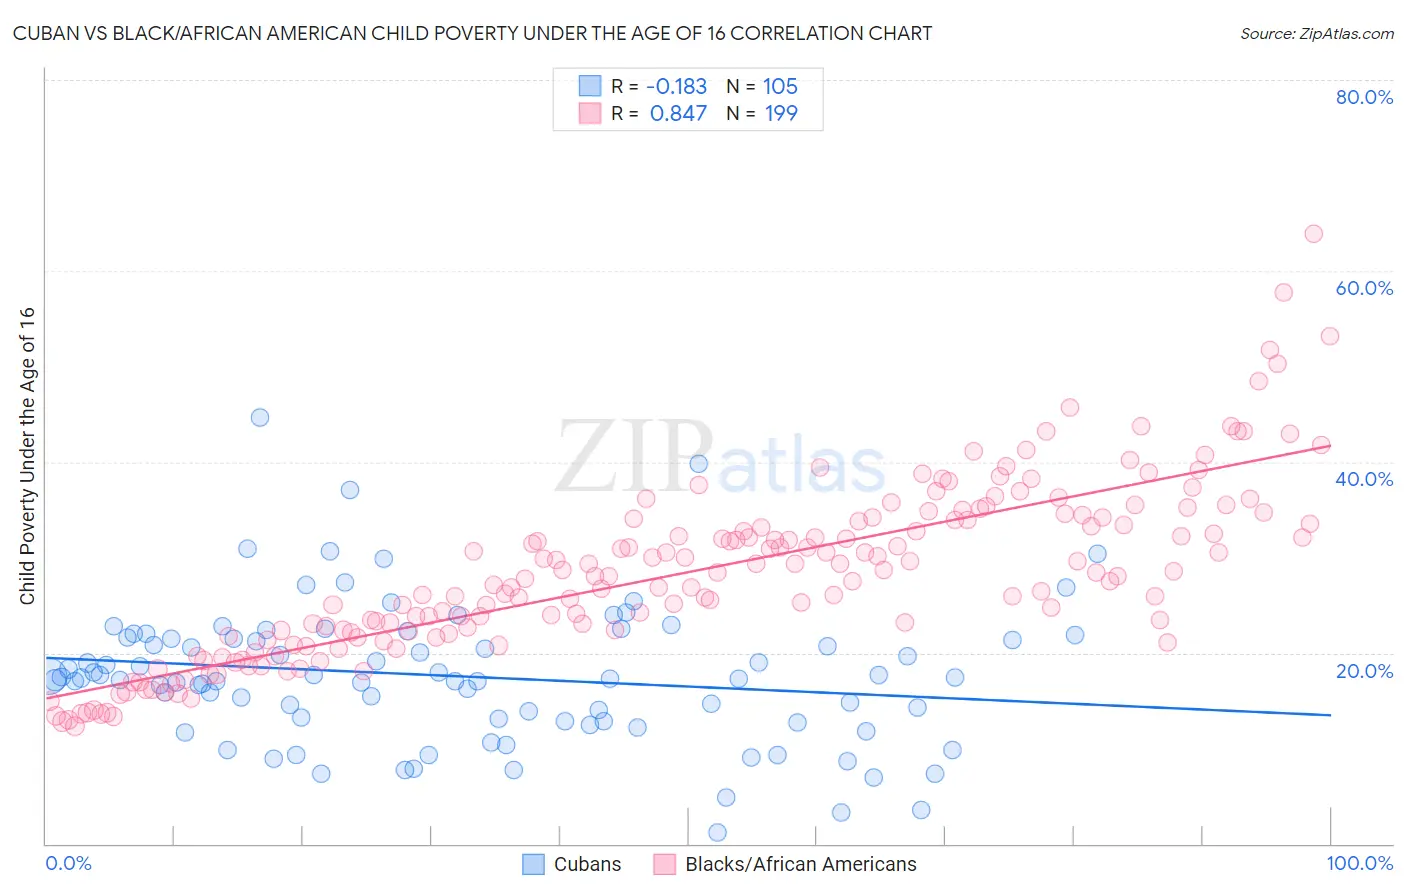 Cuban vs Black/African American Child Poverty Under the Age of 16